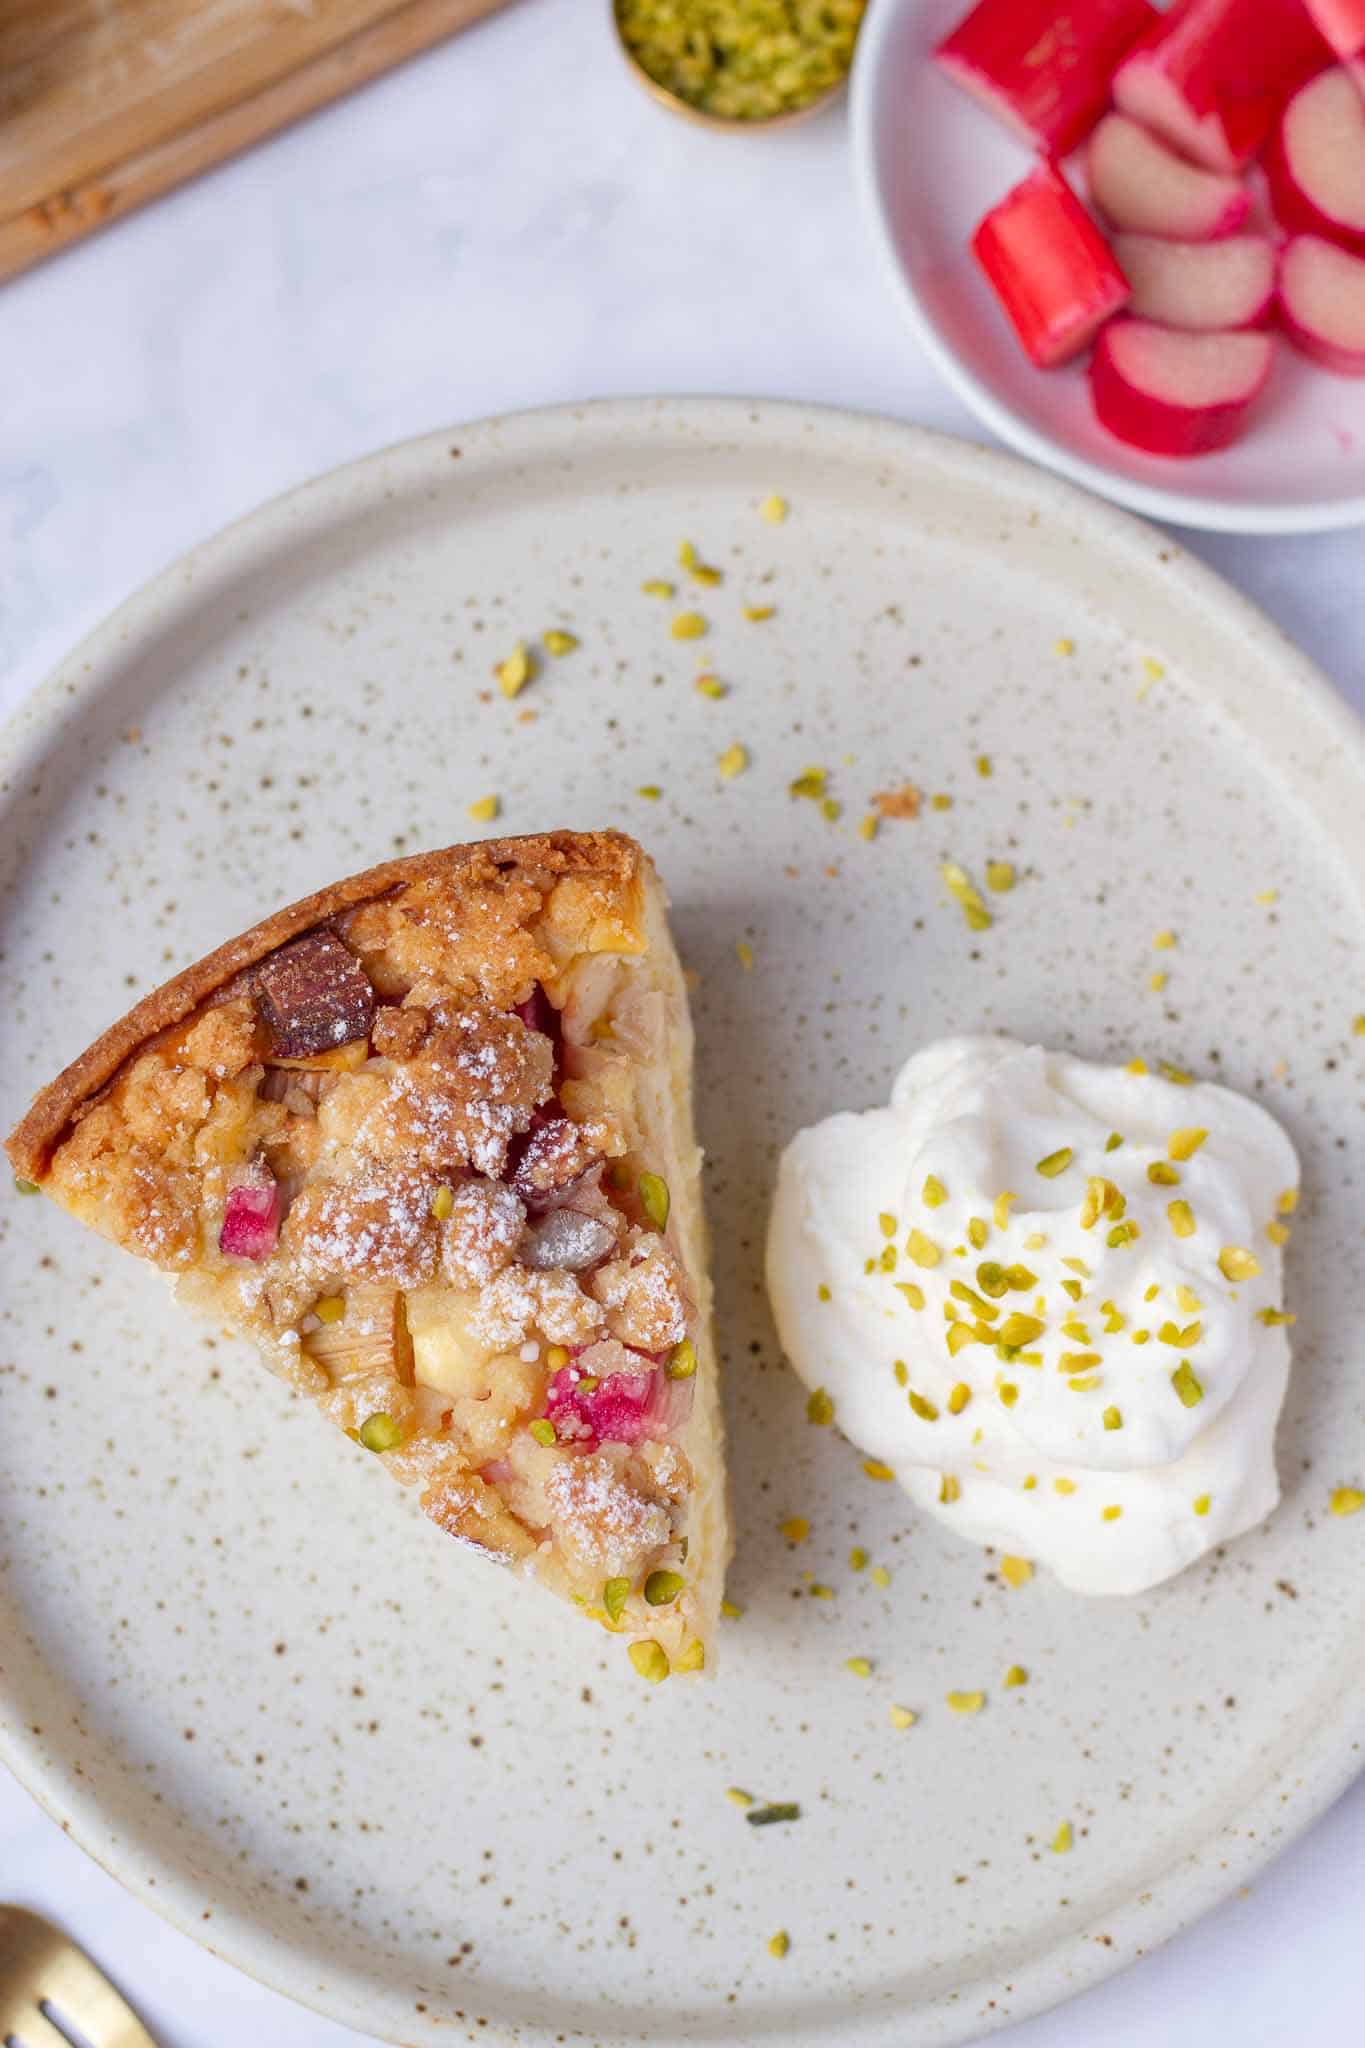 A piece of grandma's cheesecake with rhubarb and streusel on a cake plate next to a dollop of cream. You can also make the cheesecake with raspberries or currants.